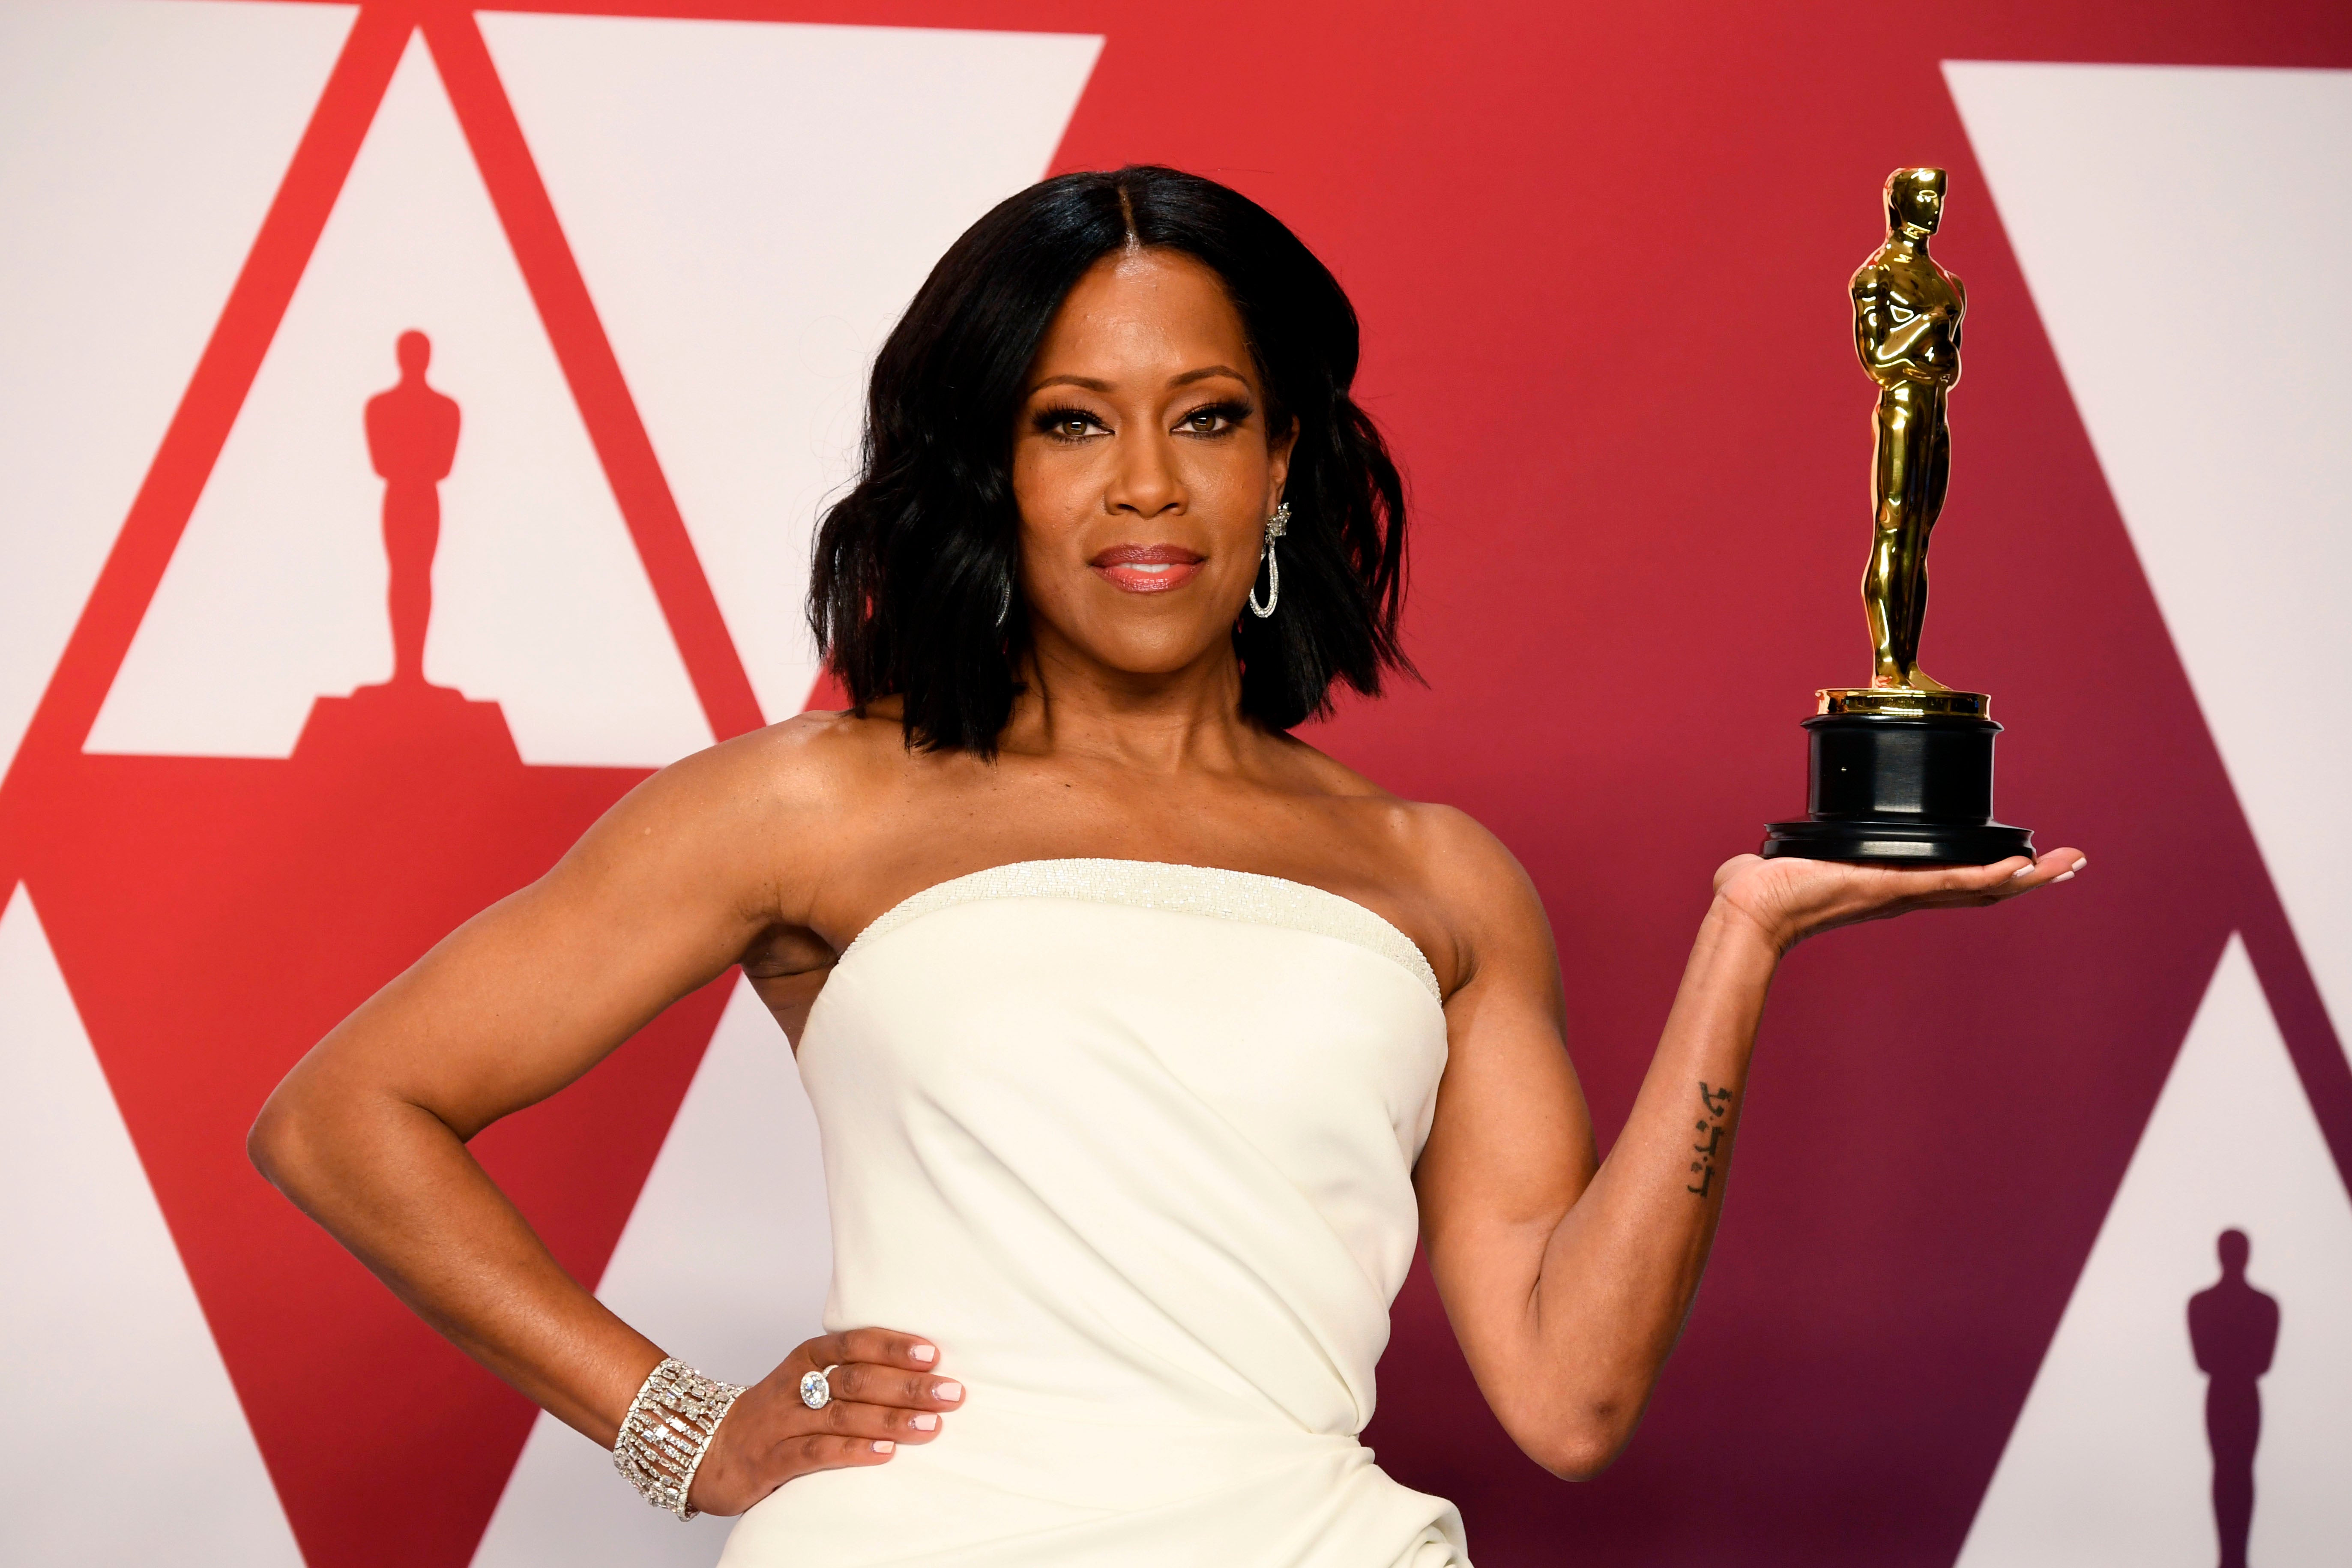 Oscars 2019: Regina King Wins Best Supporting Actress